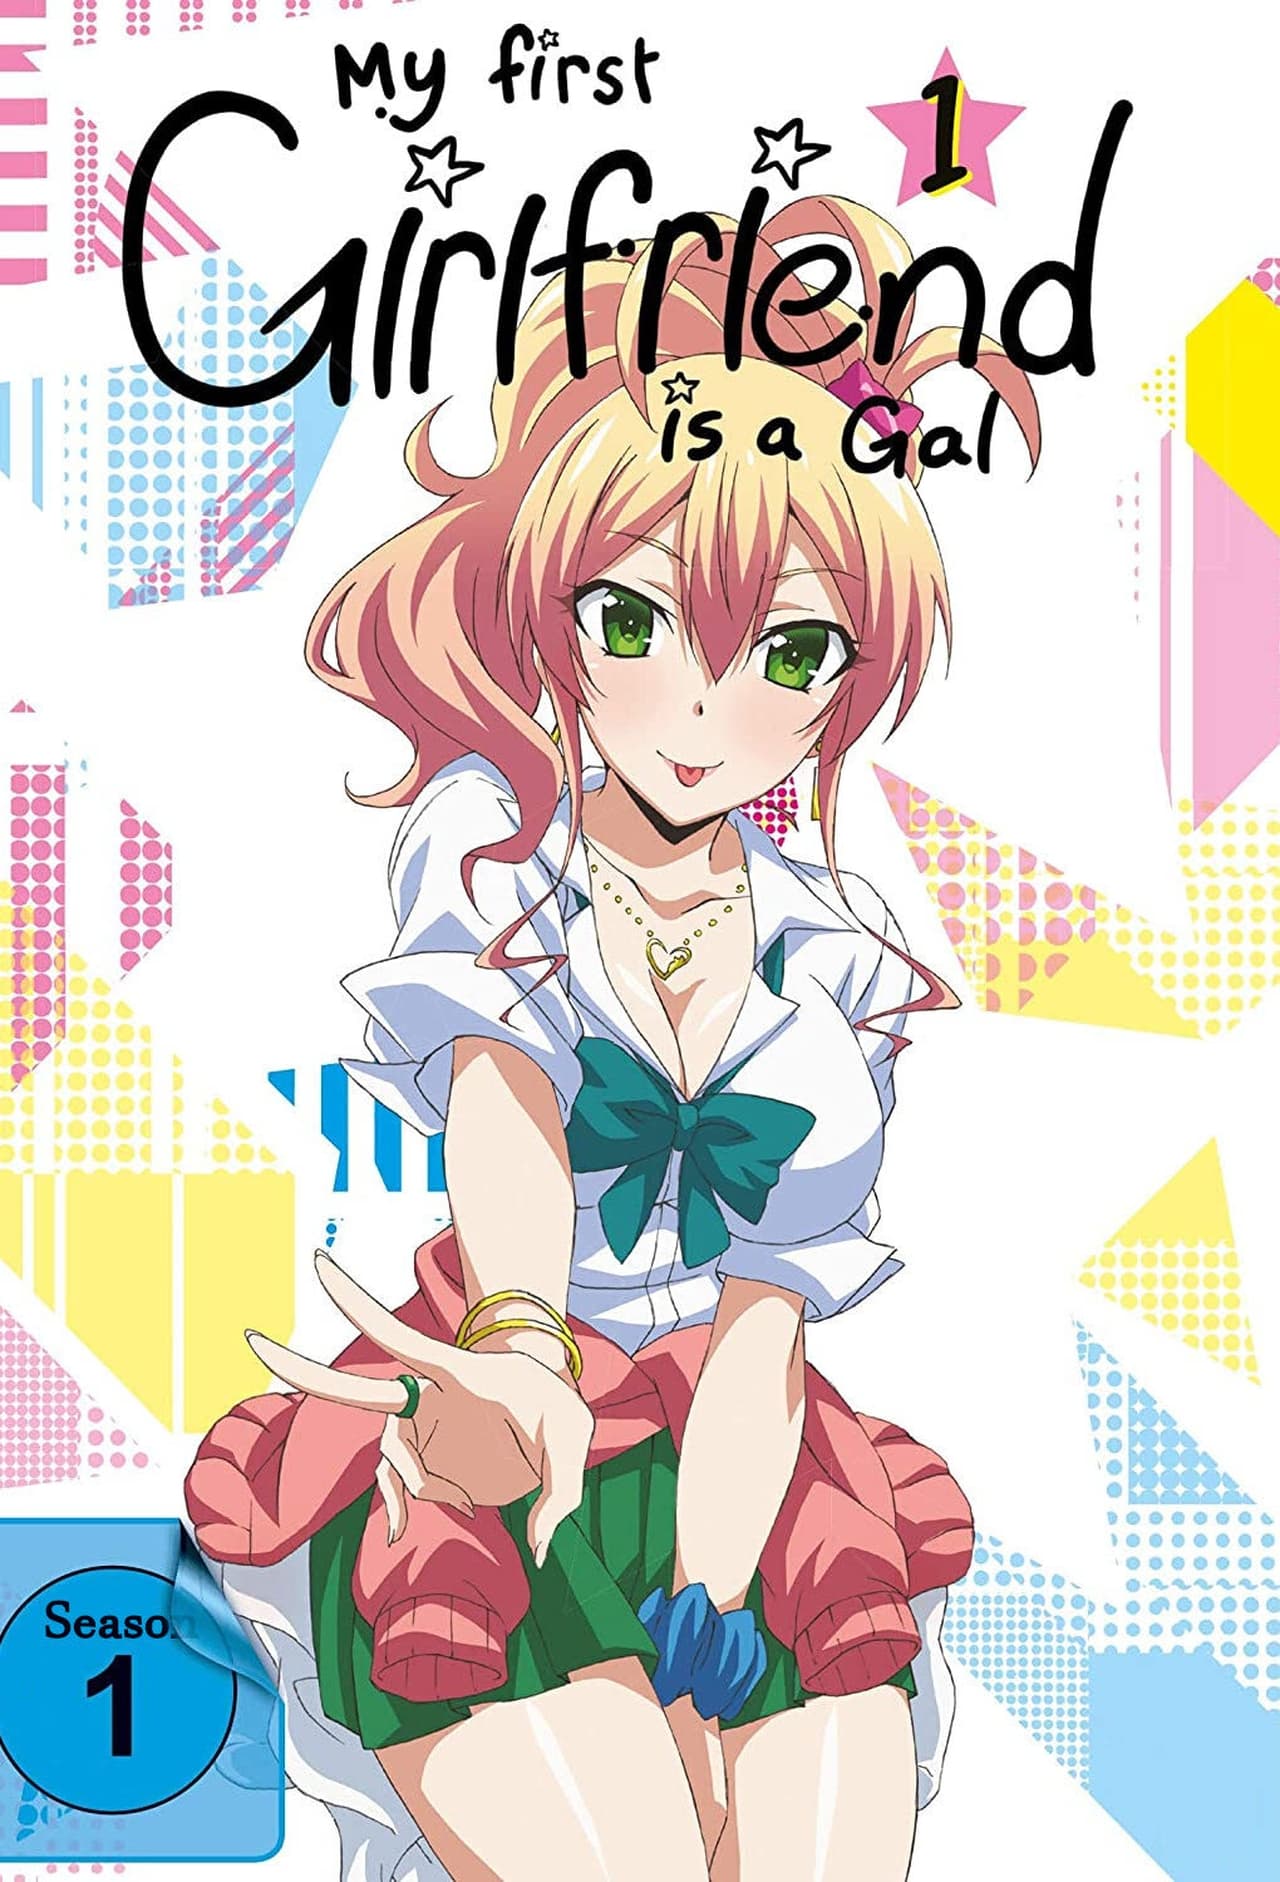 Best Episodes of My First Girlfriend is a Gal (Interactive Rating